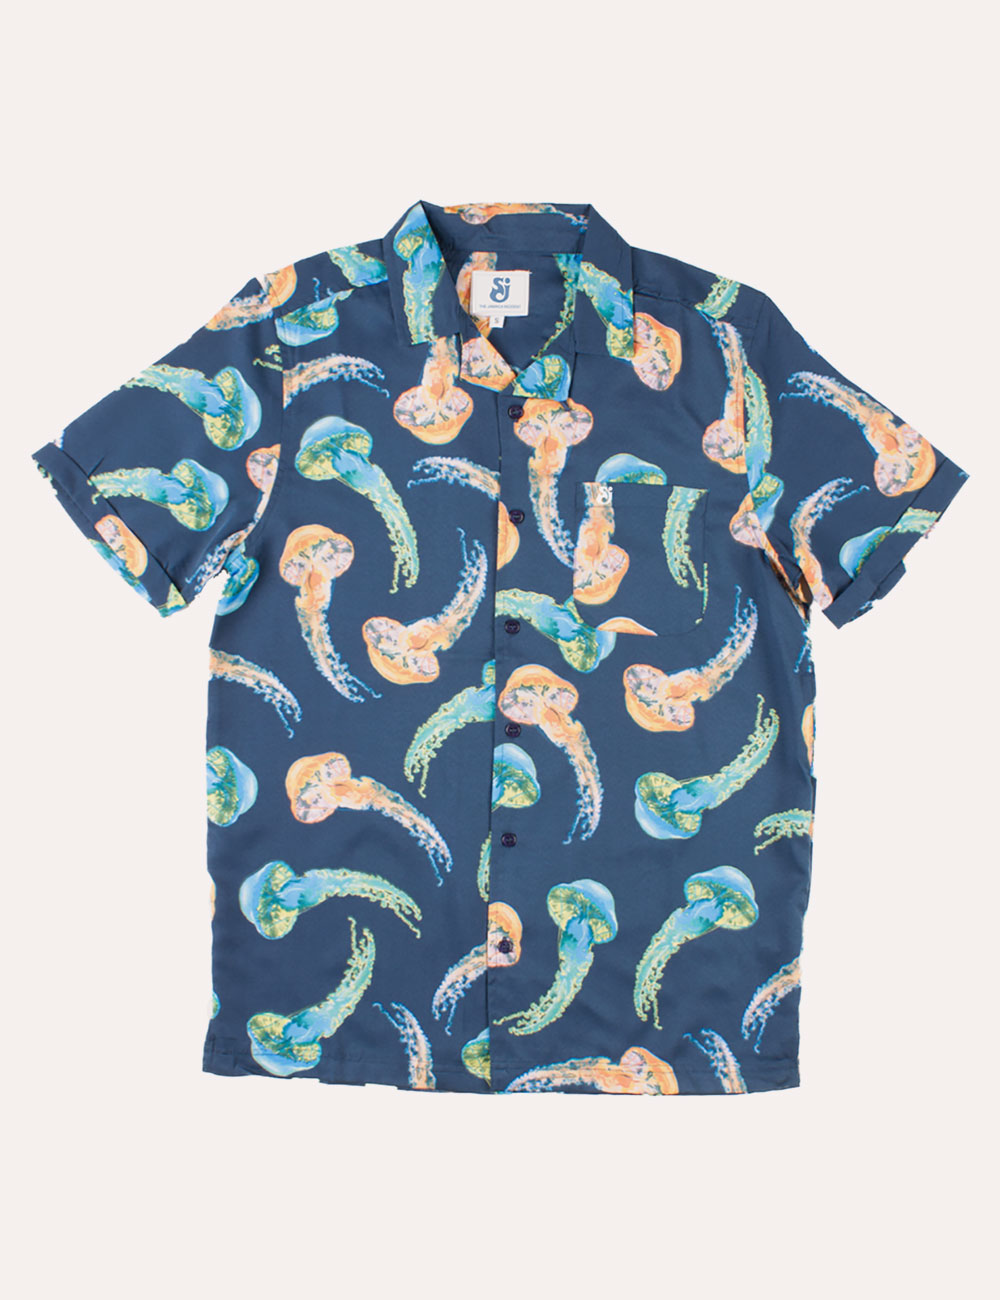 The String Cheese Incident - Merch - Jellyfish Pattern Short Sleeve Button Up Shirt